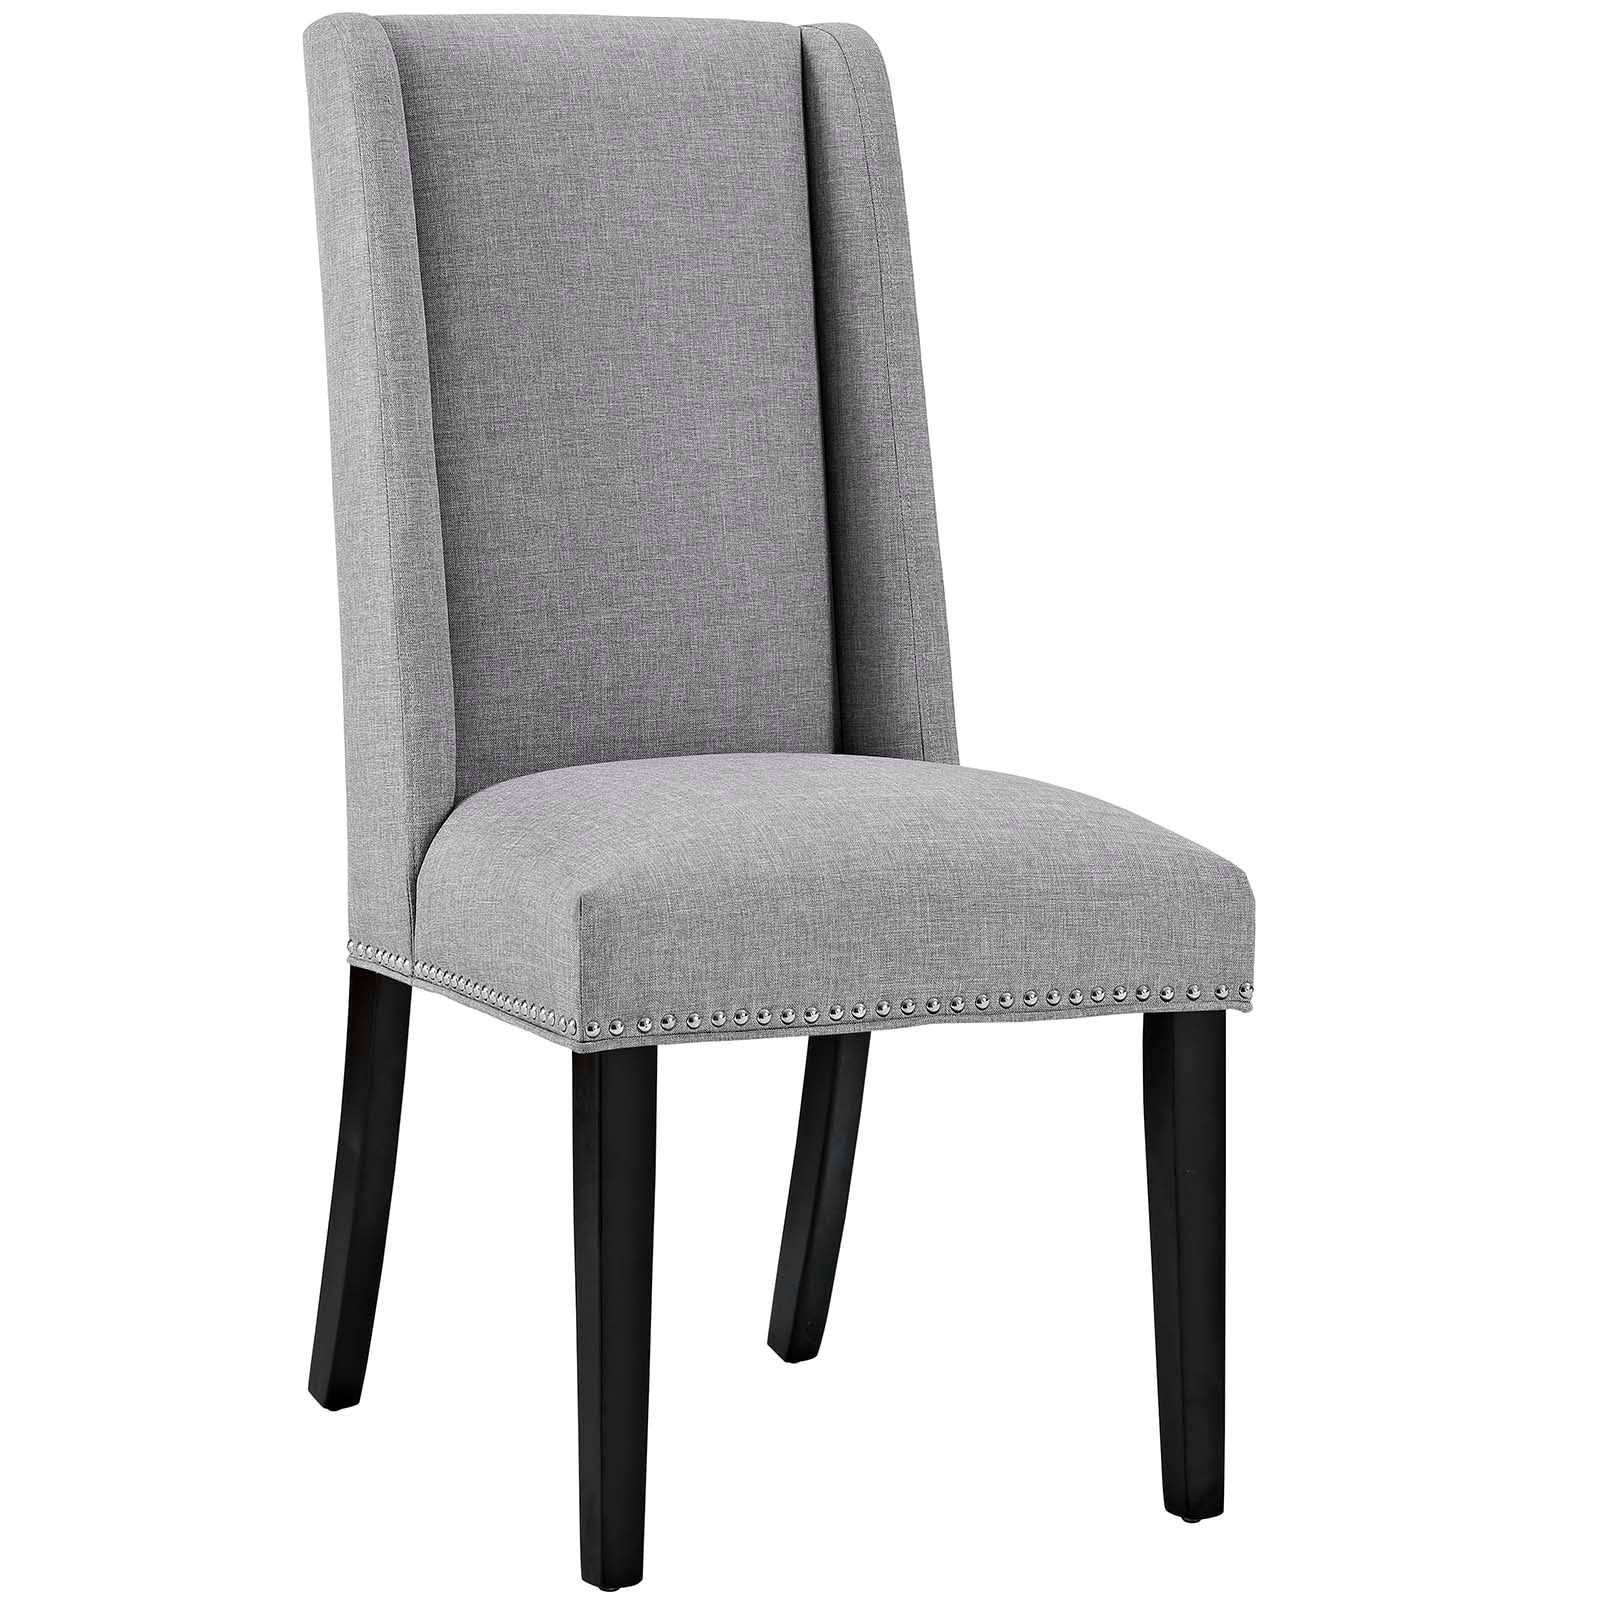 Modway Dining Chairs - Baron Dining Chair Fabric Light Gray (Set of 2)